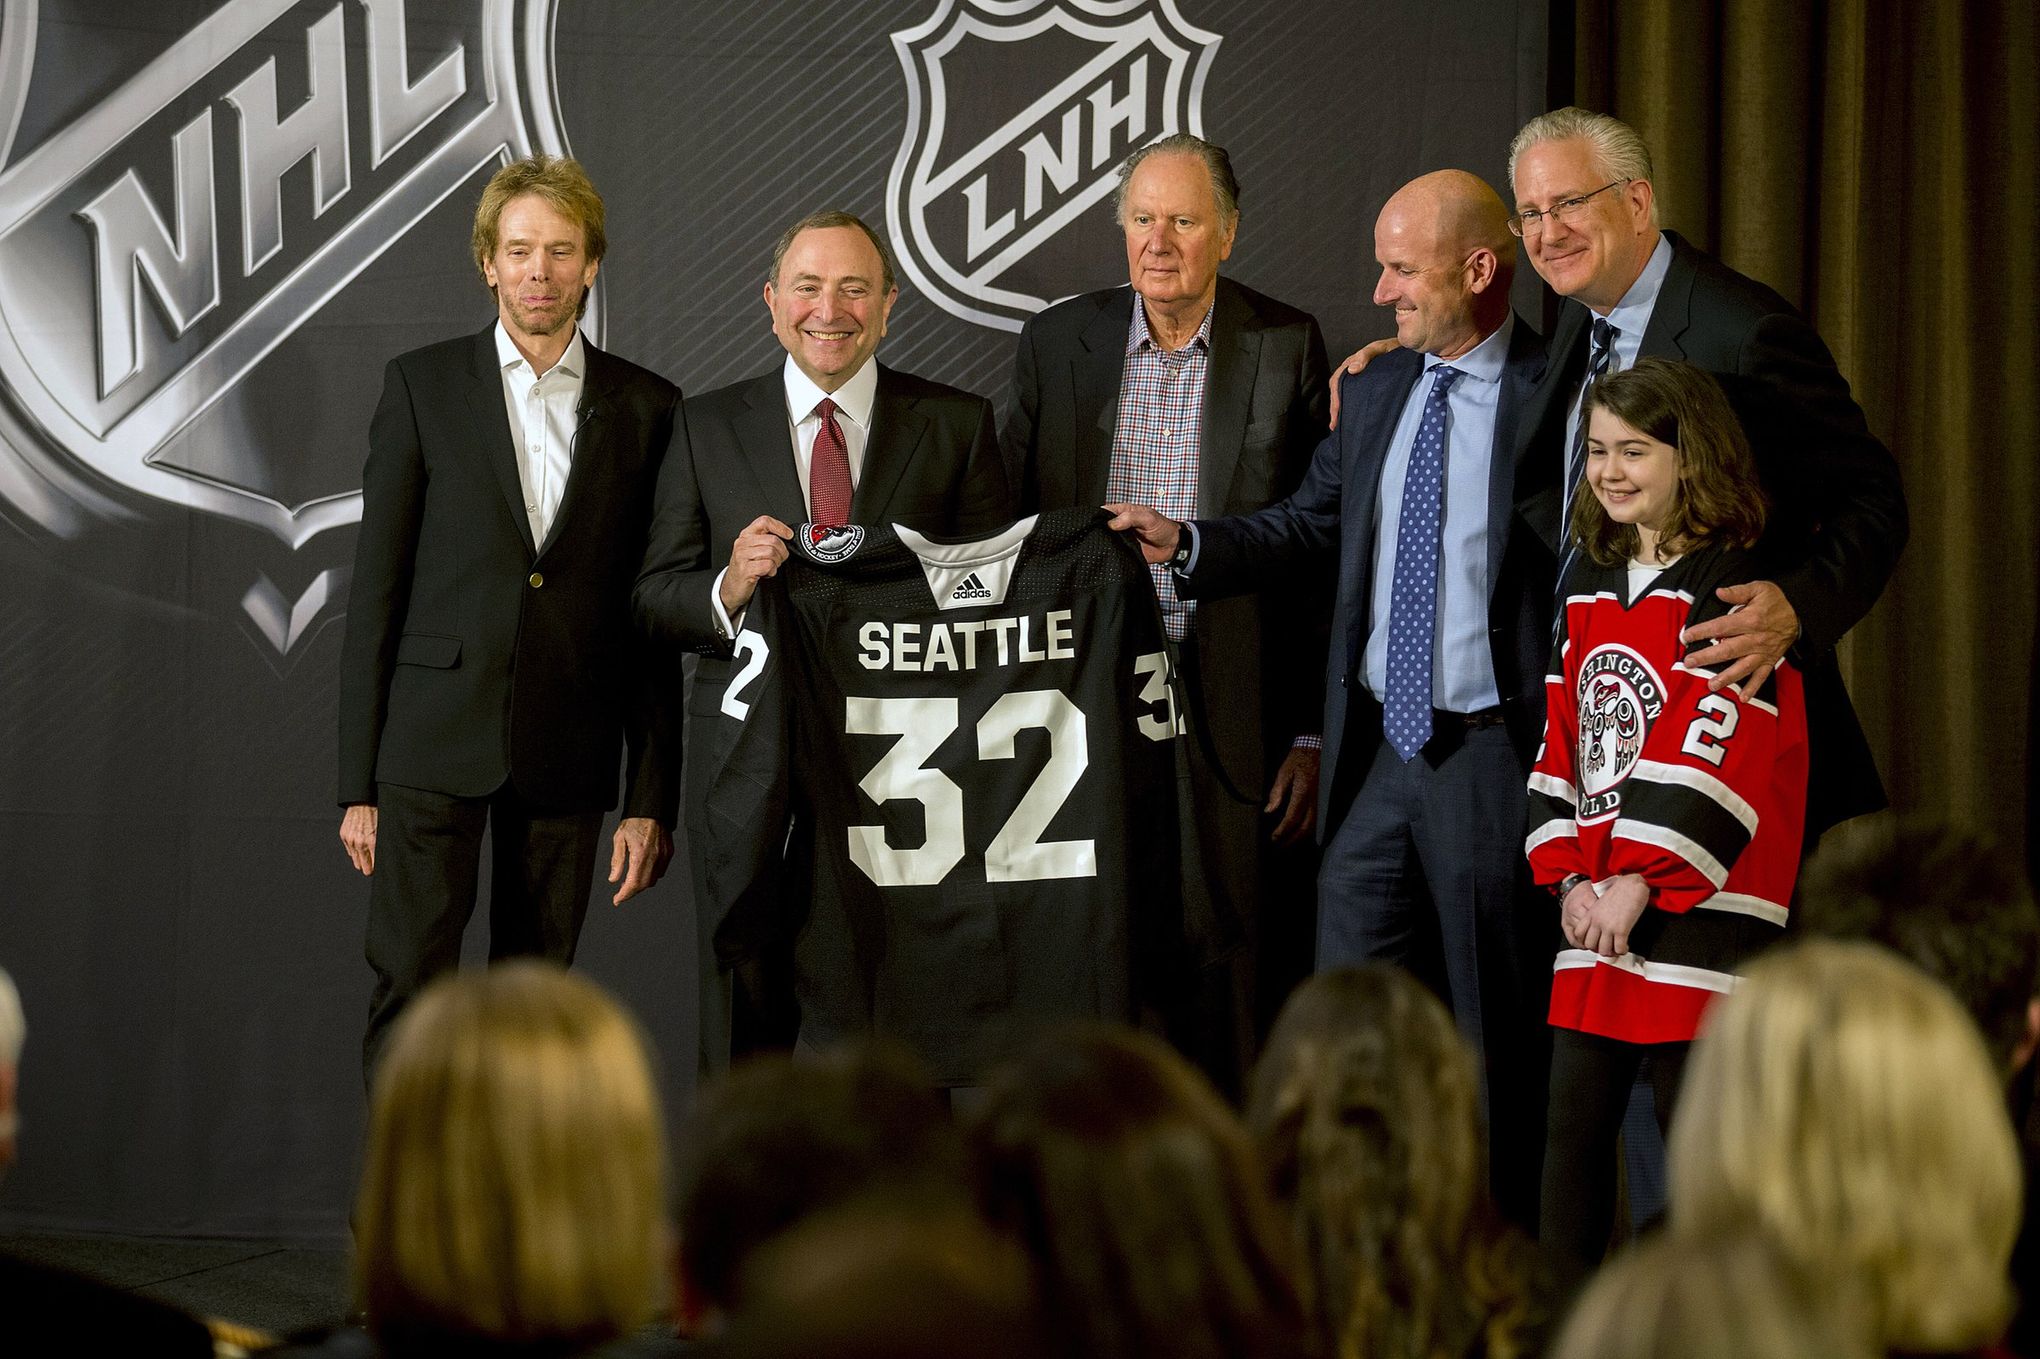 NHL Expansion: Could San Diego be added after Seattle?